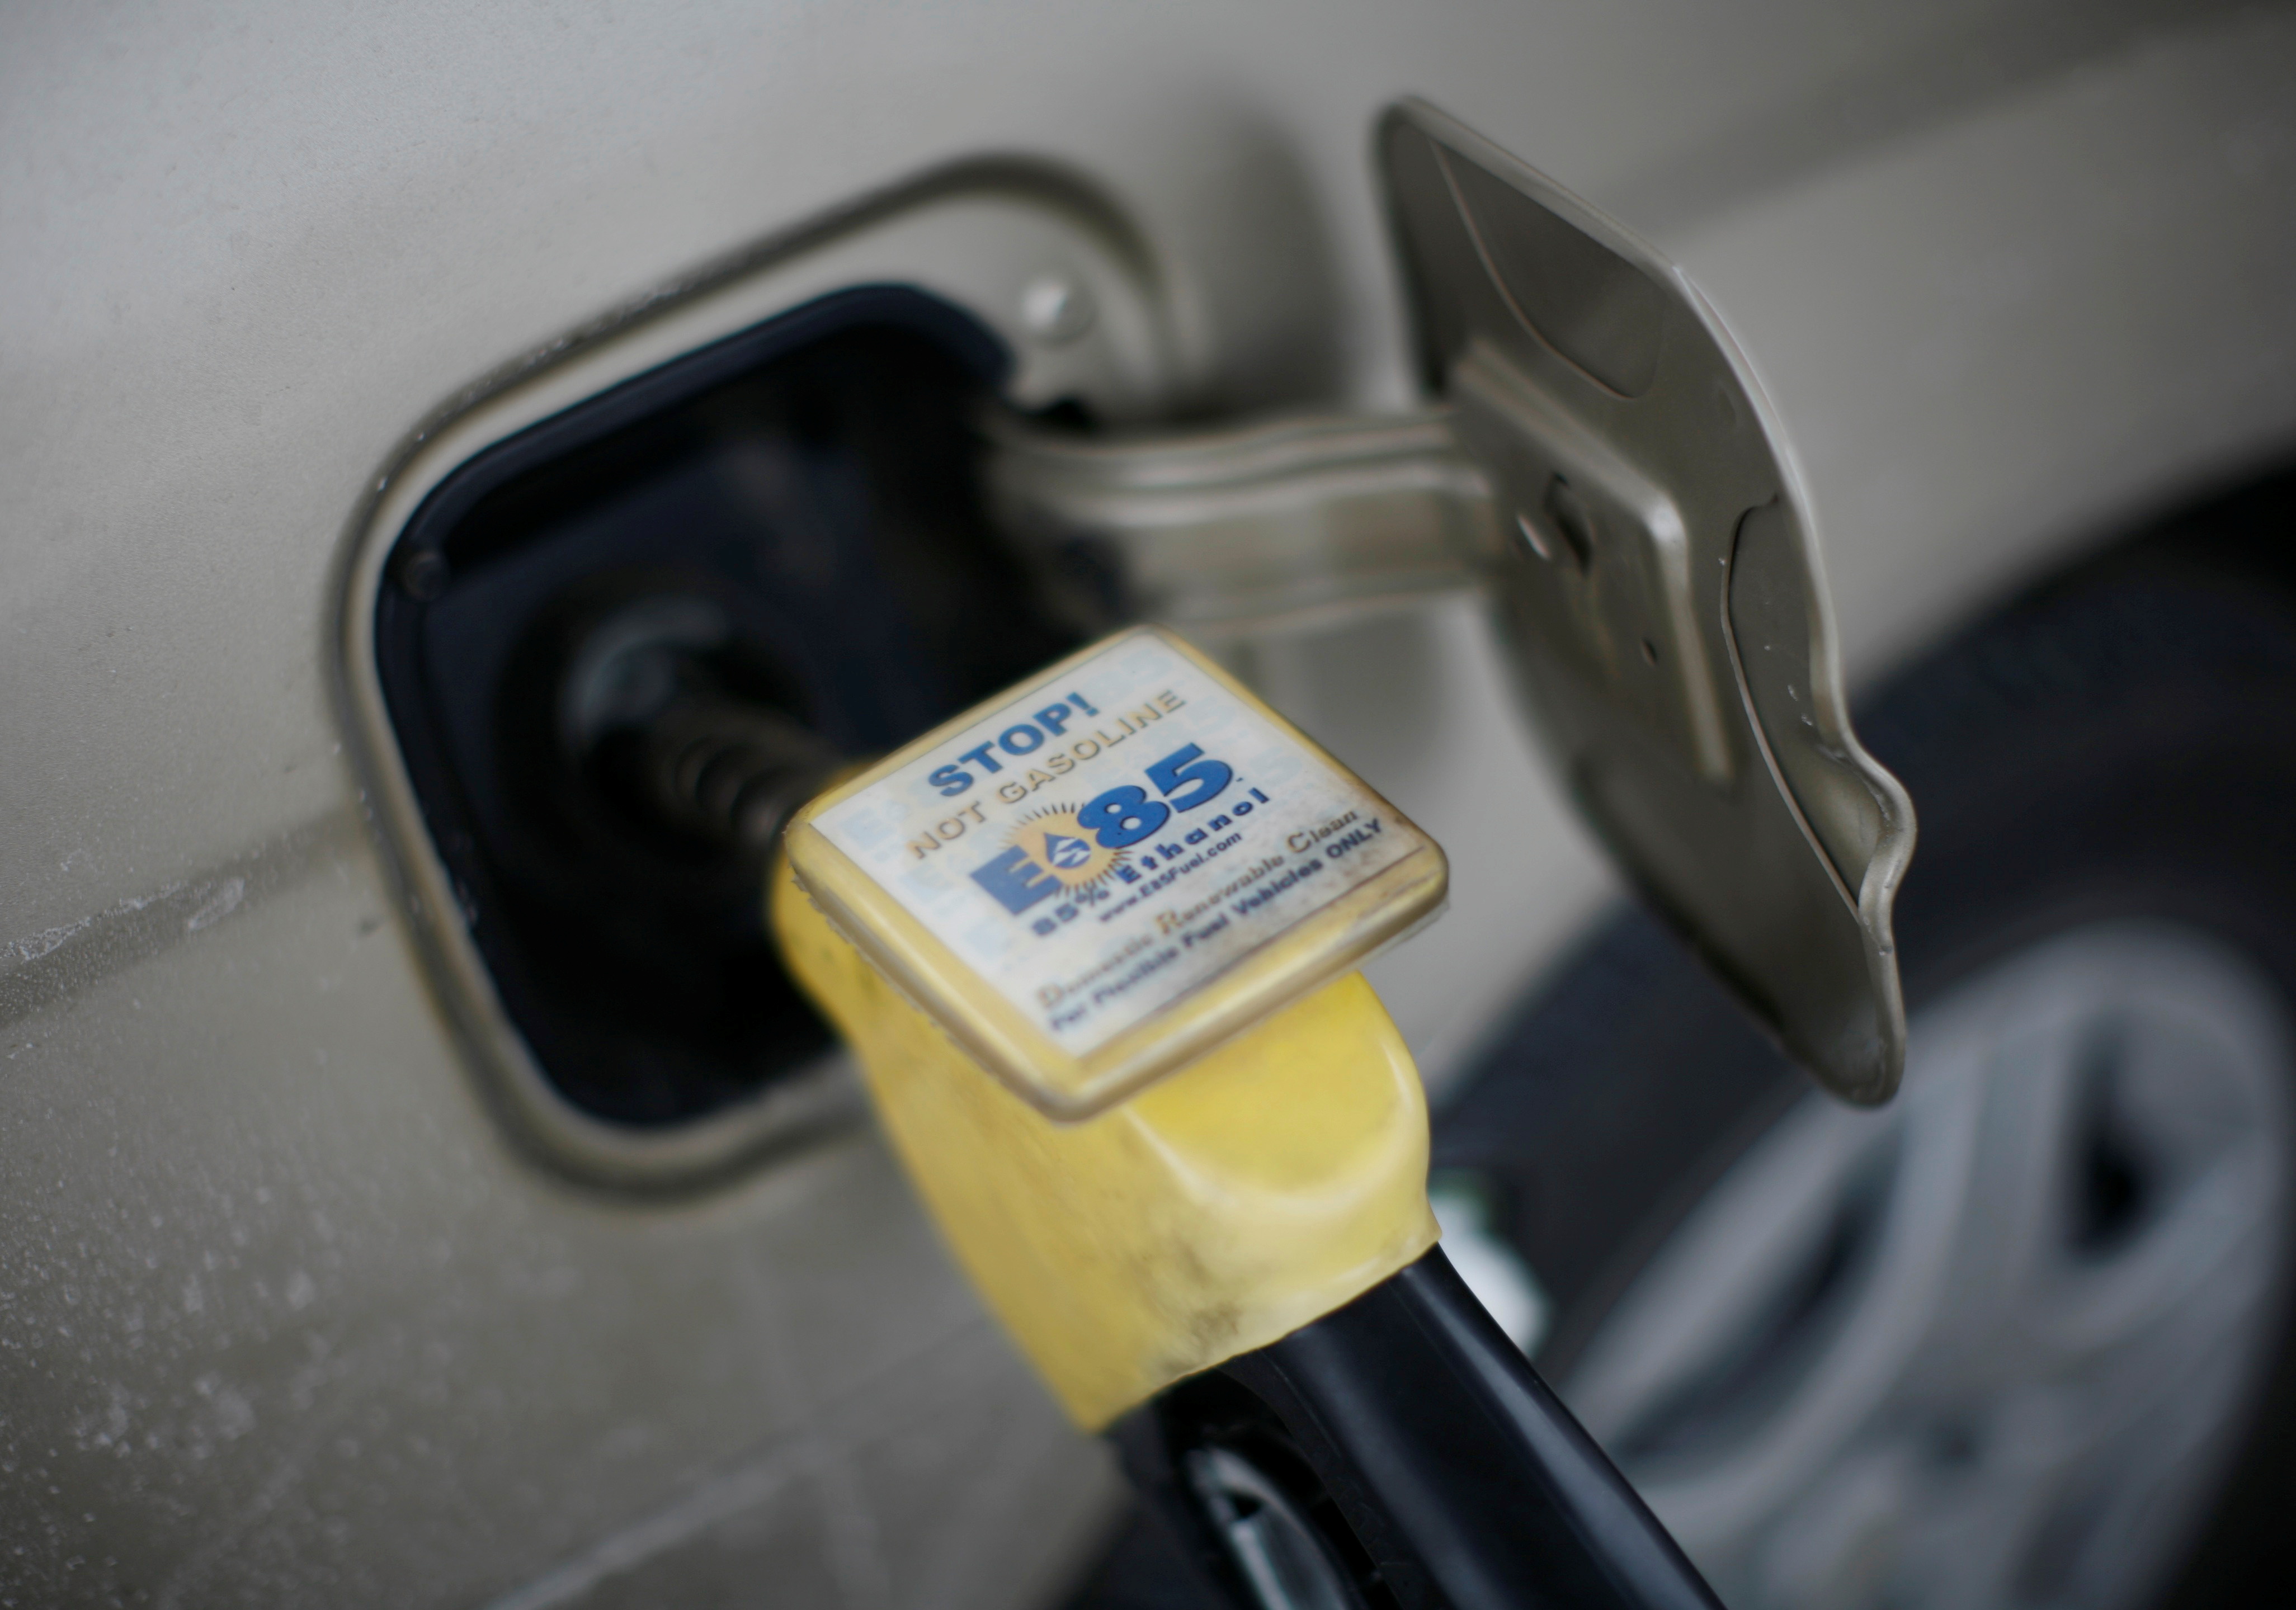 E85 ethanol fuel is shown being pumped into a vehicle at a gas station selling alternative fuels in the town of Nevada, Iowa, December 6, 2007. REUTERS/Jason Reed